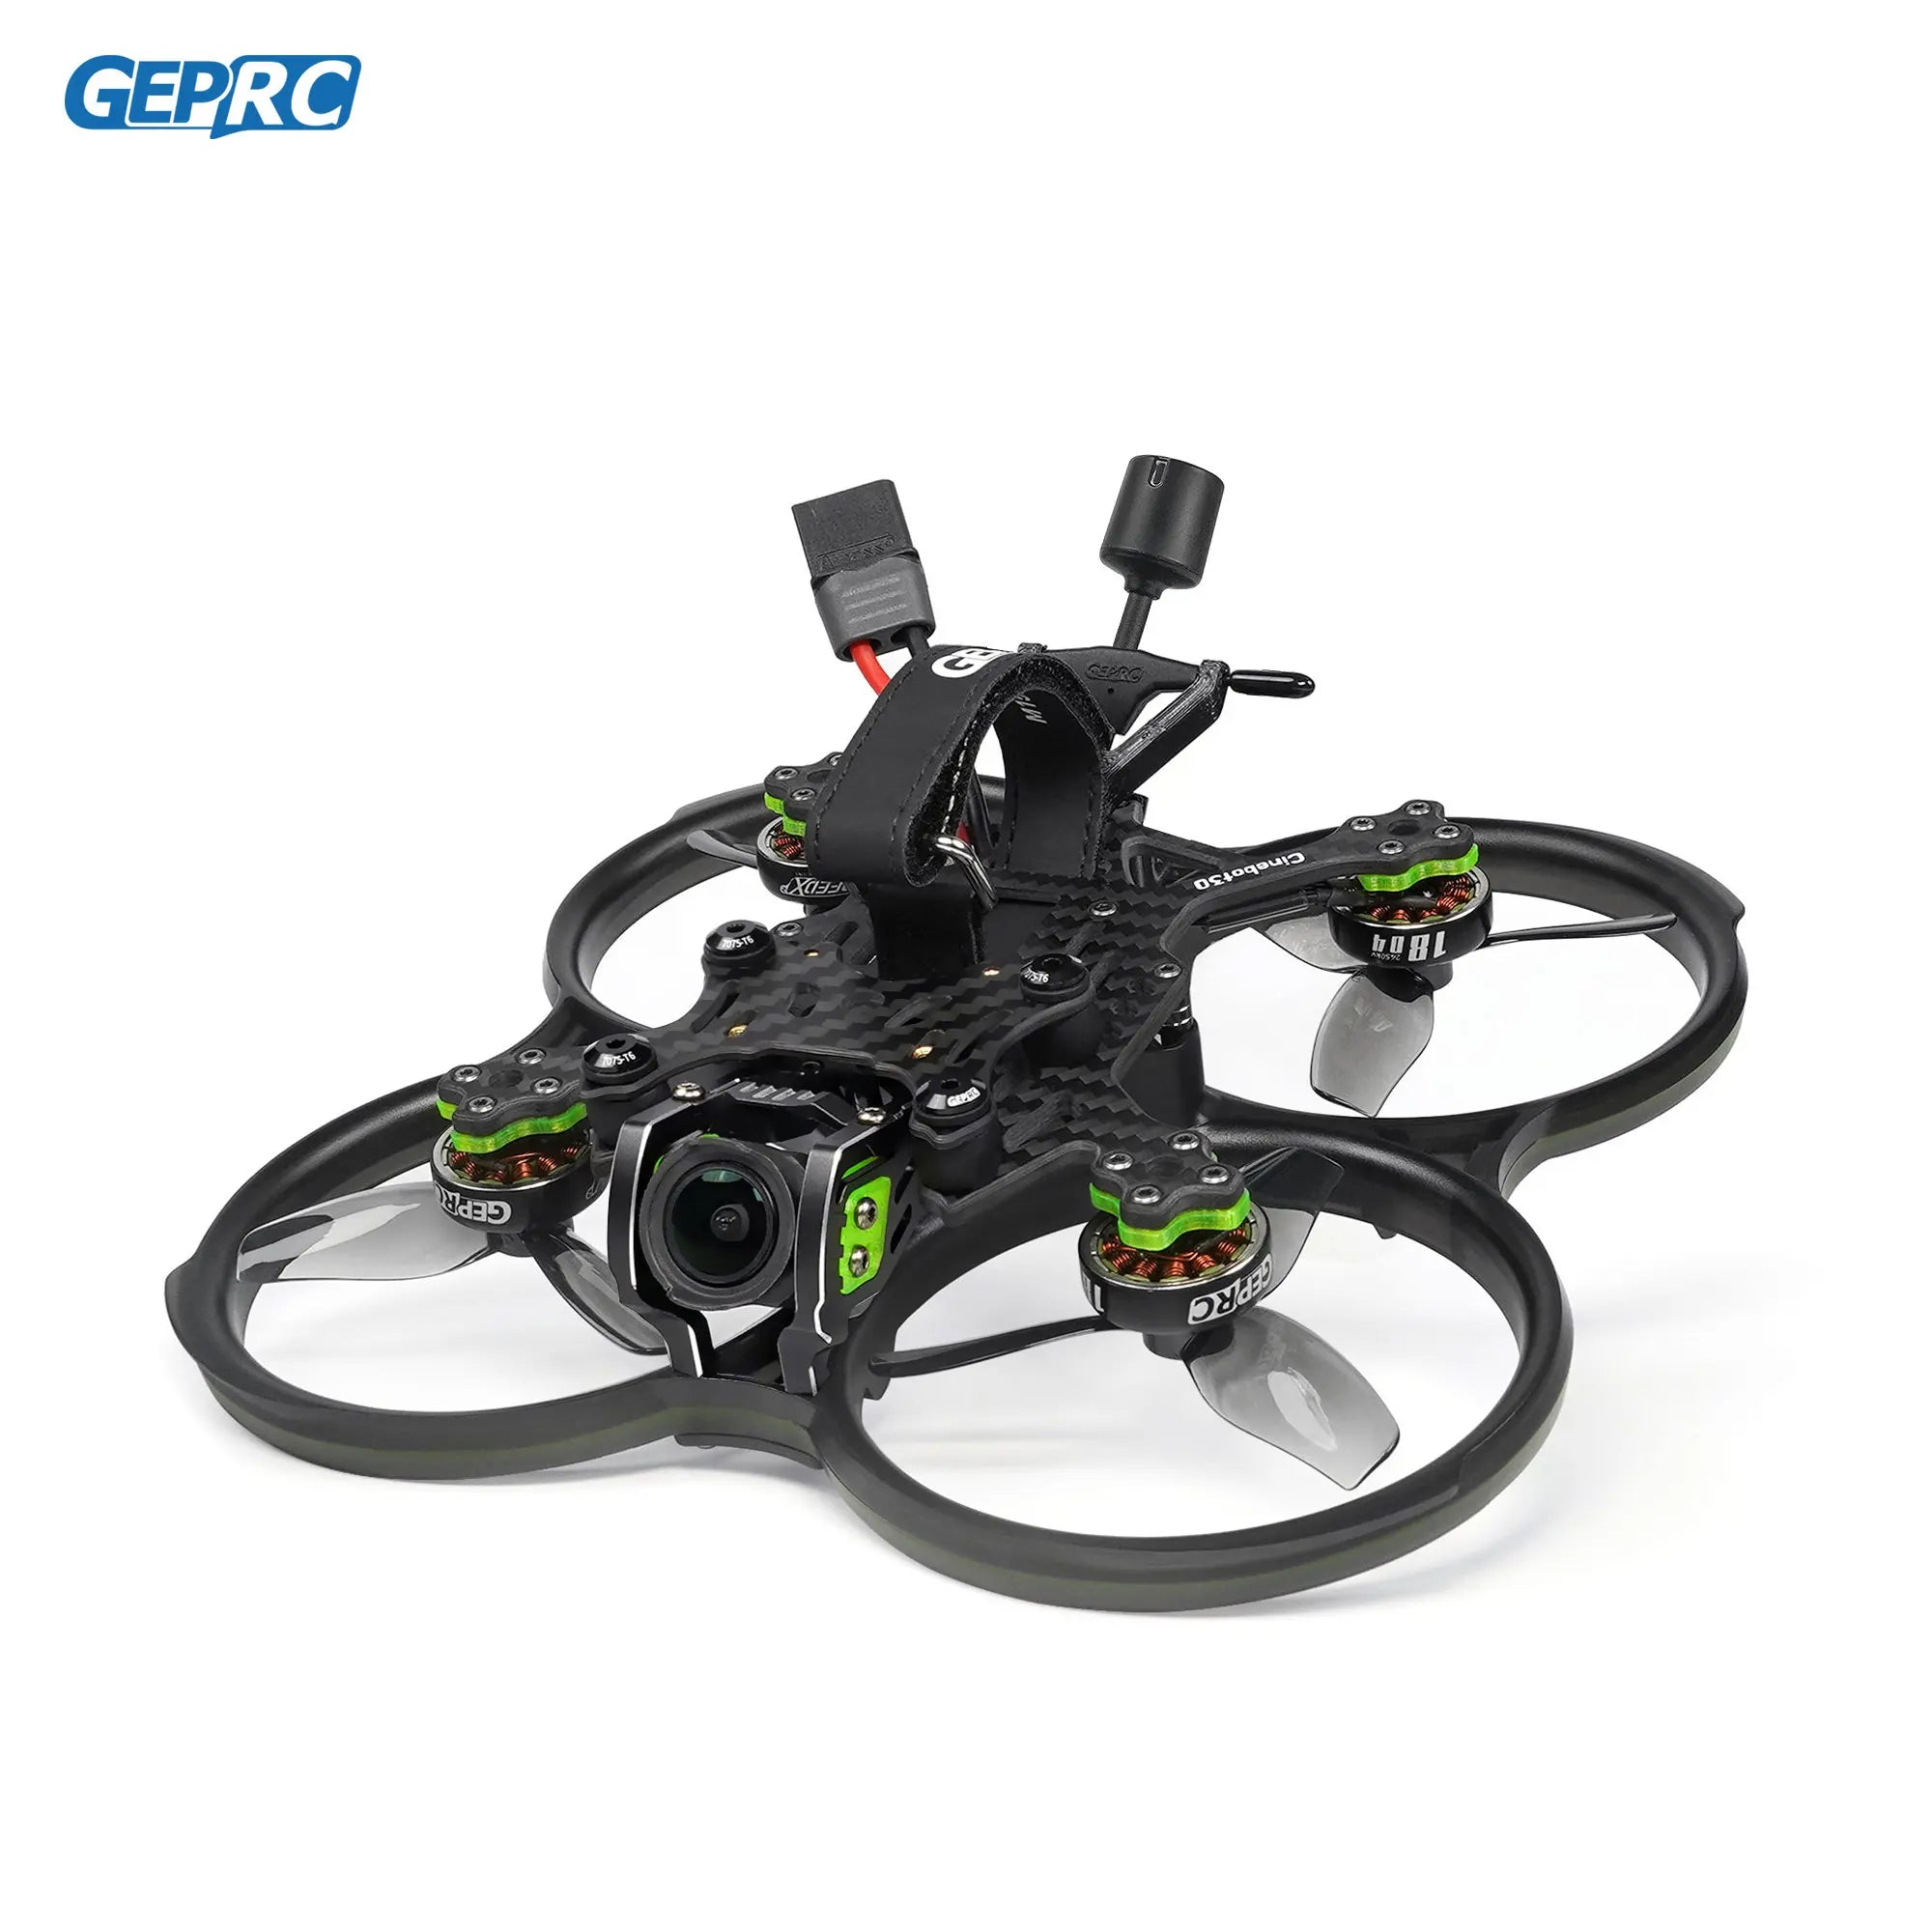 GEPRC Cinebot30 4K HD FPV Racing Drone with DJI O3 Air Unit